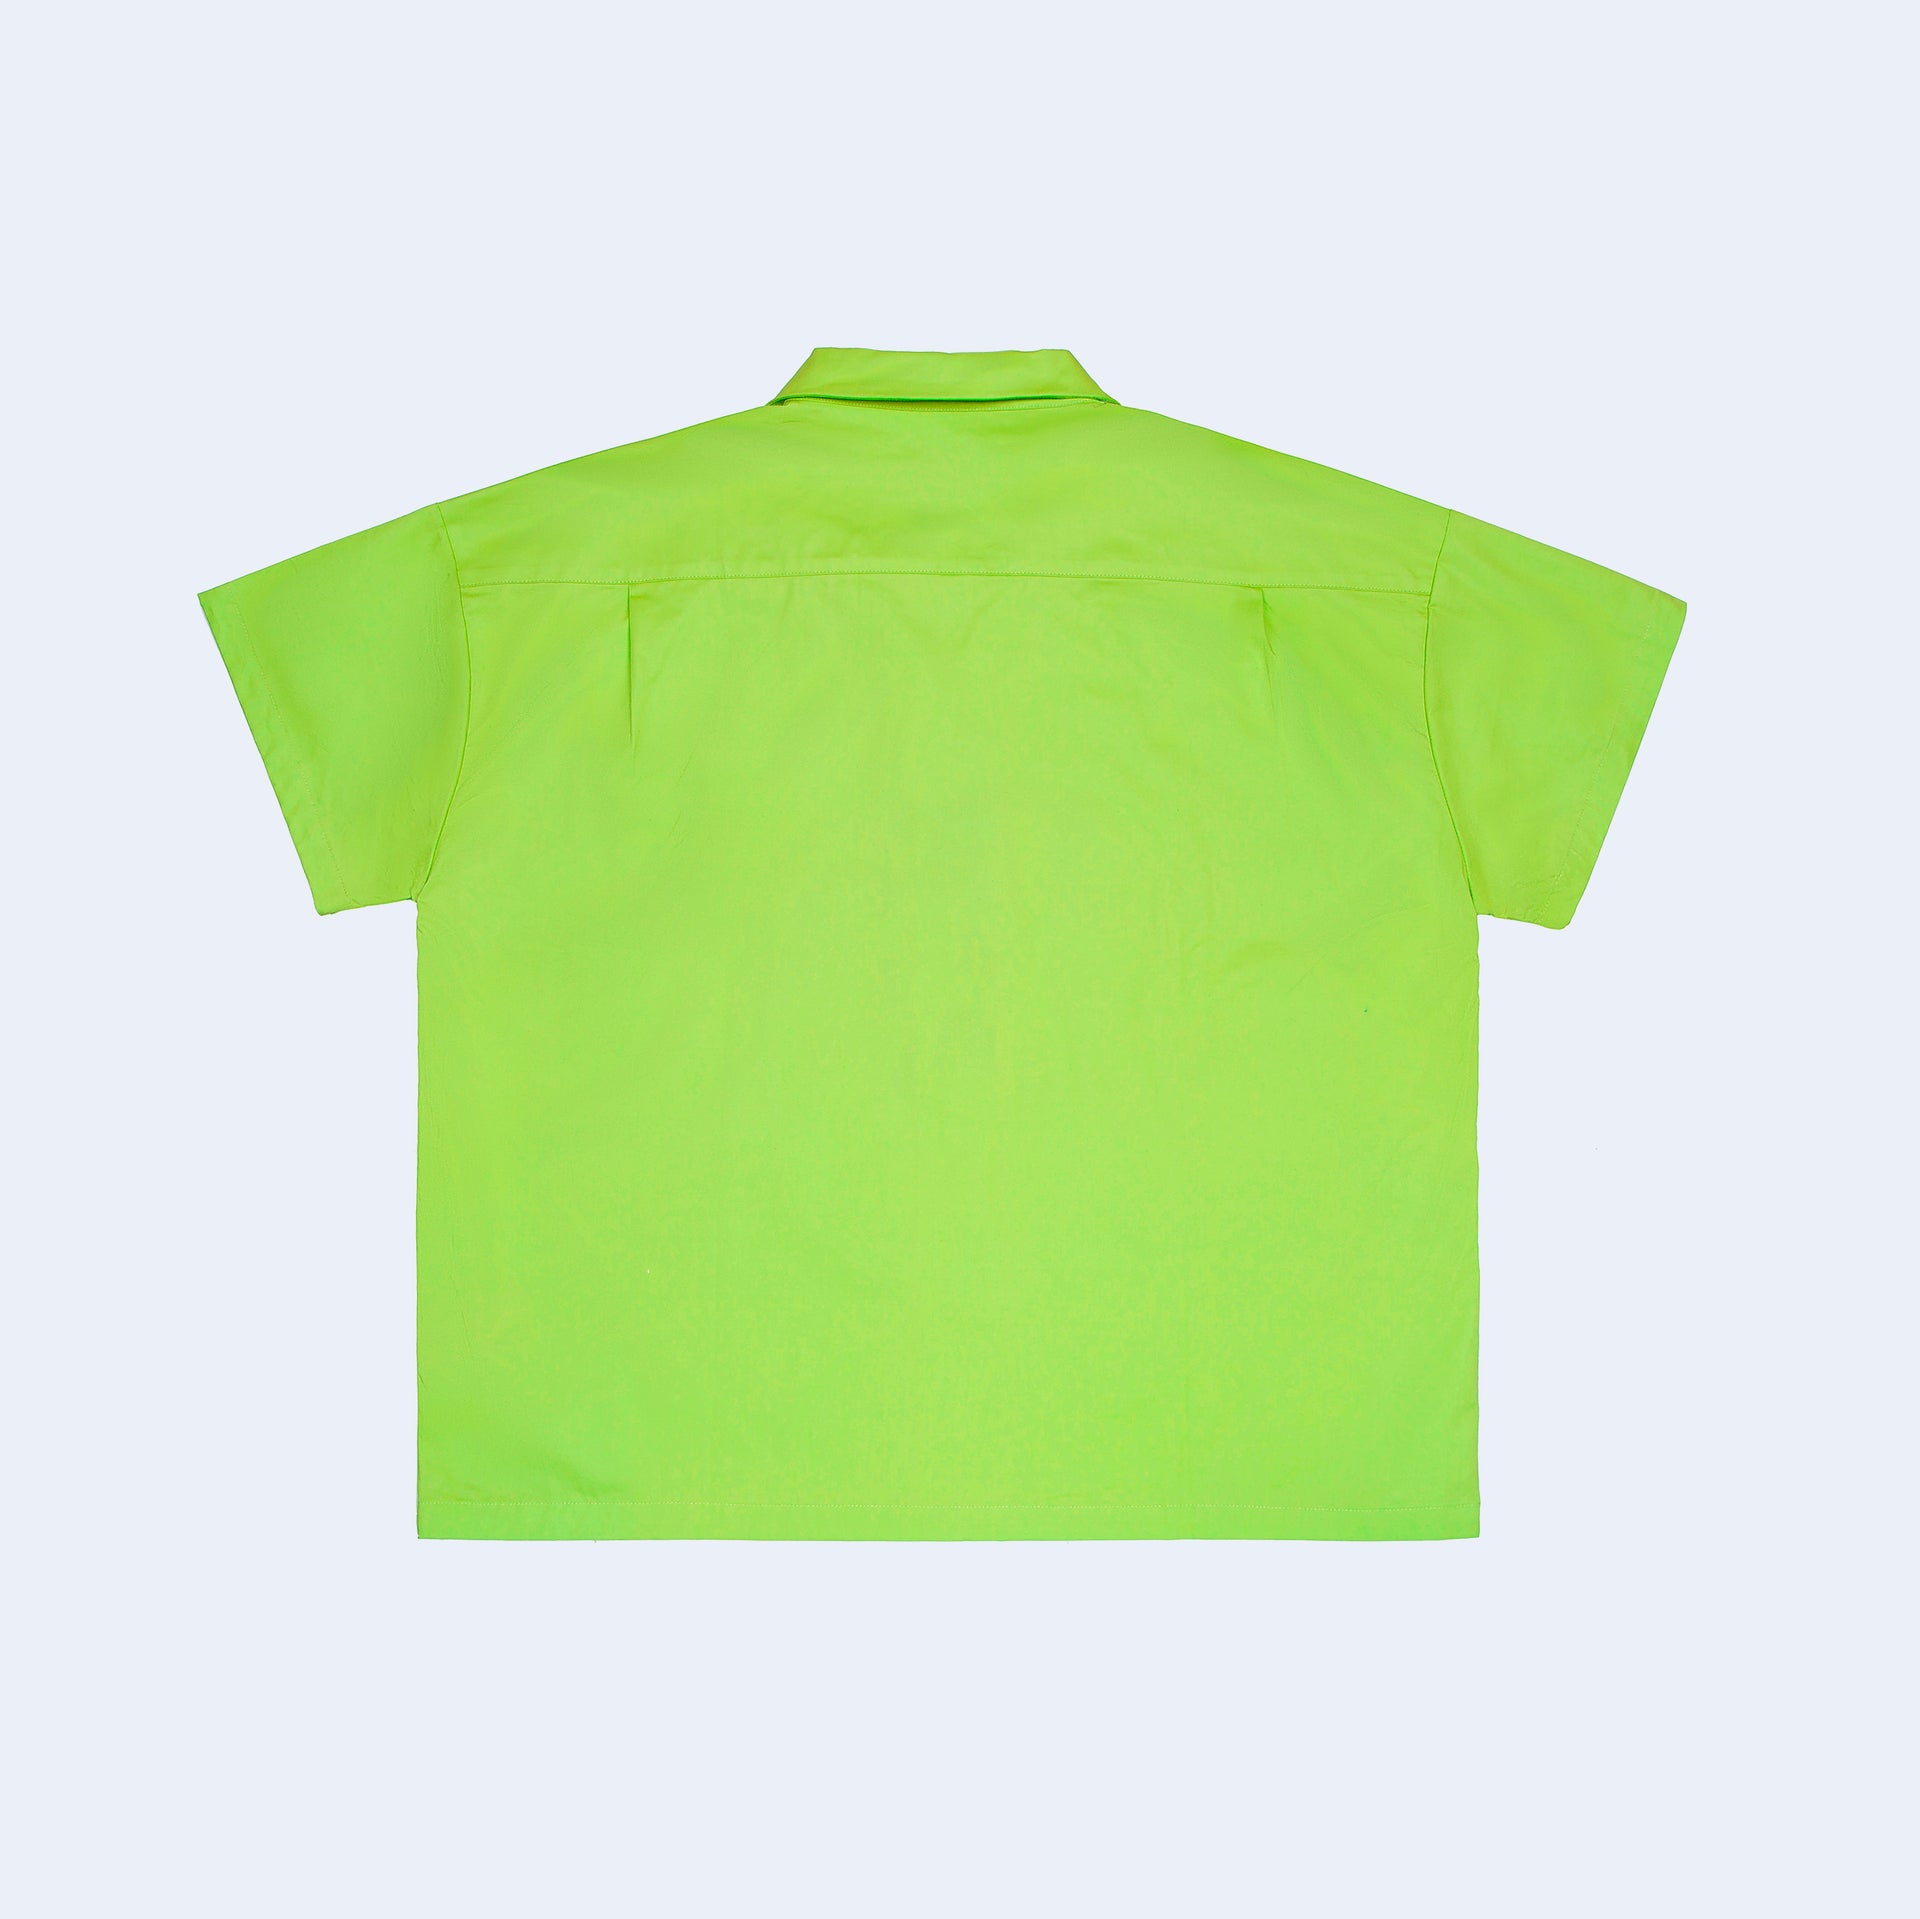 To be Shown to Me Green Shirt